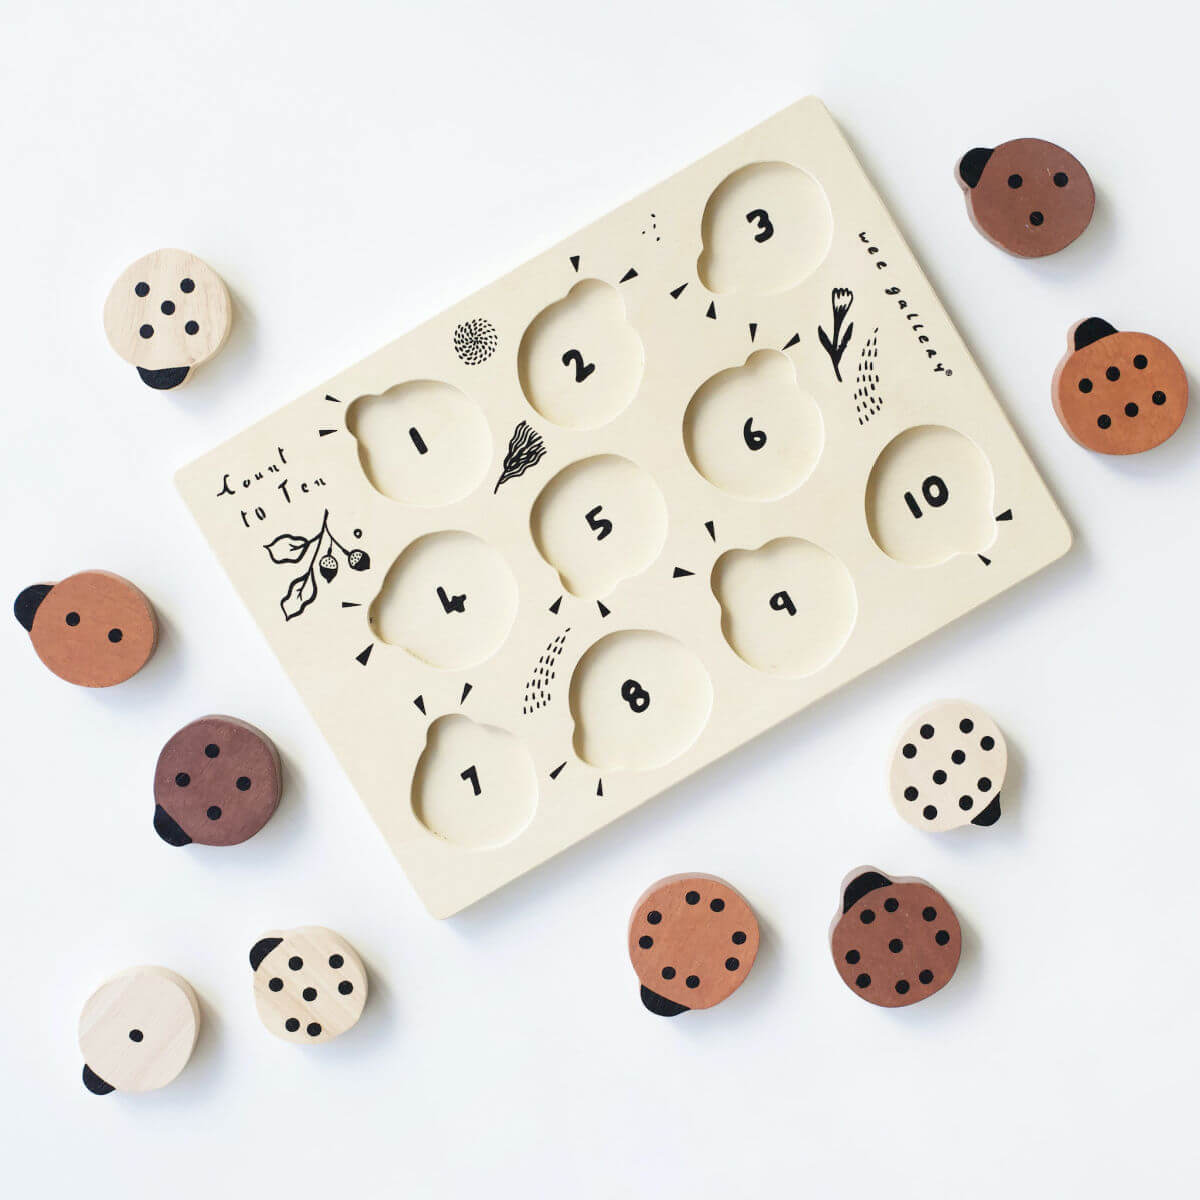  Wee Gallery wooden tray puzzle - Count to 10 Ladybirds